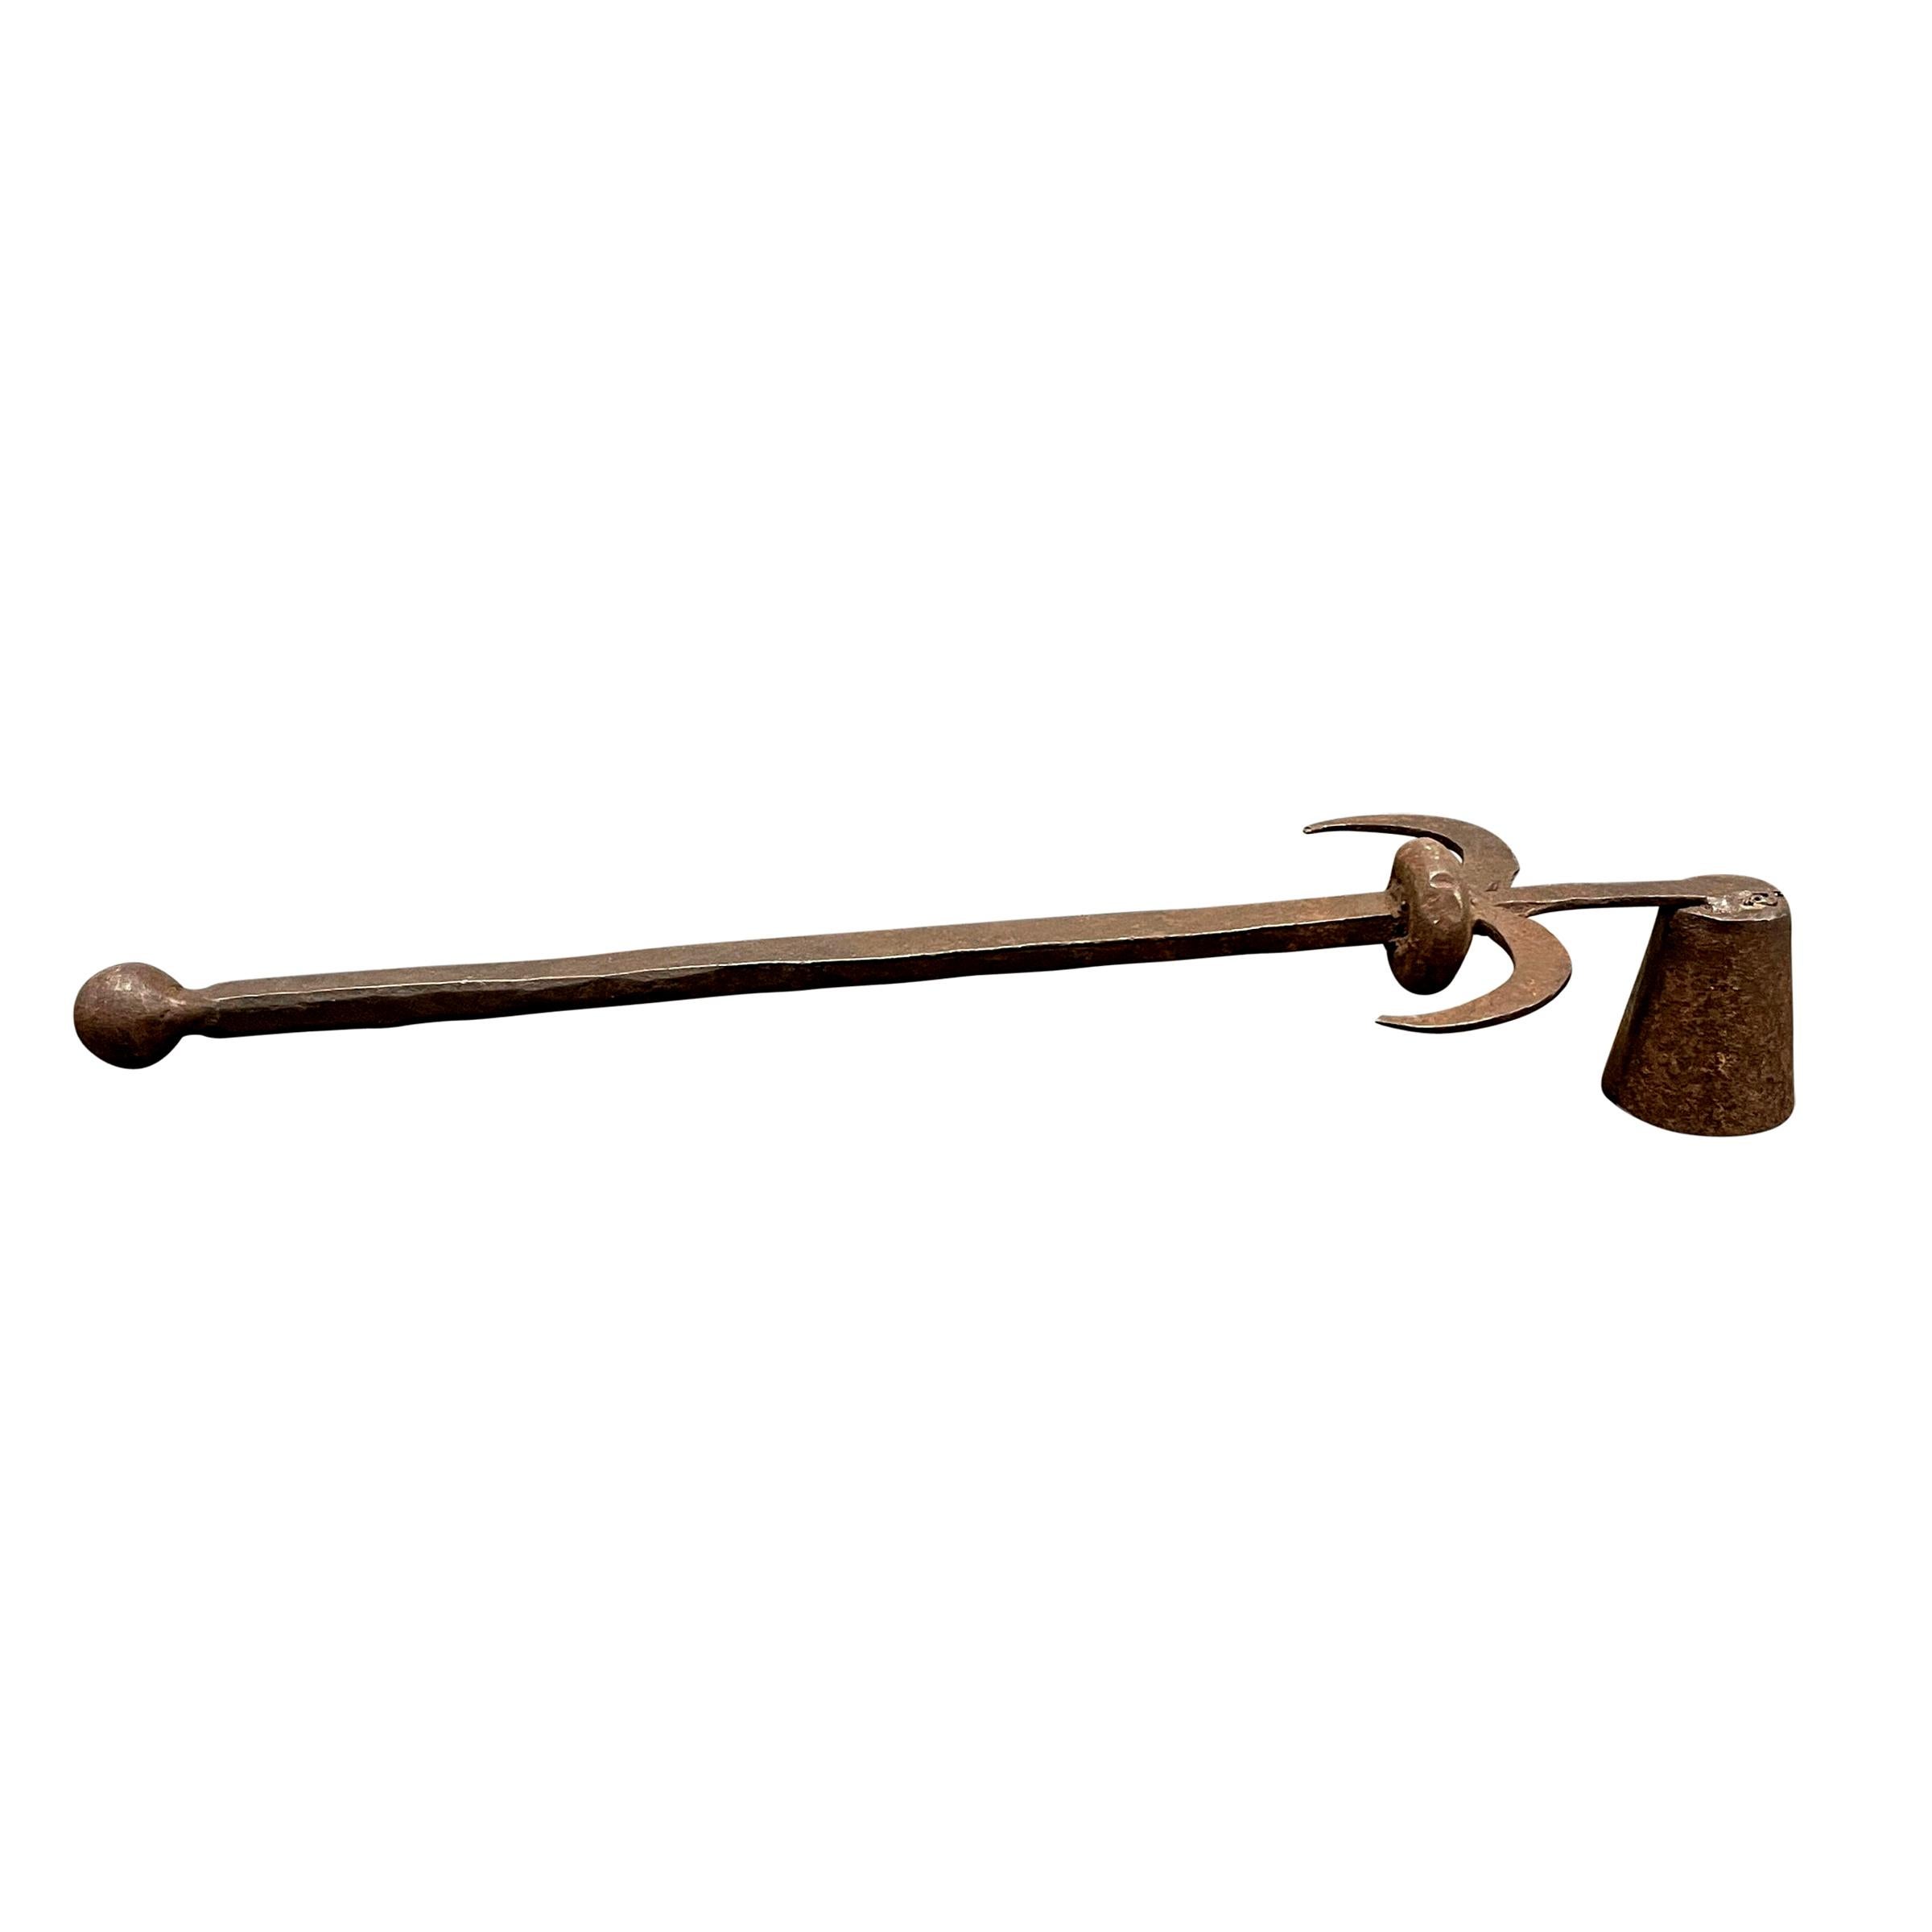 Modernist Wrought Iron Candle Snuffer